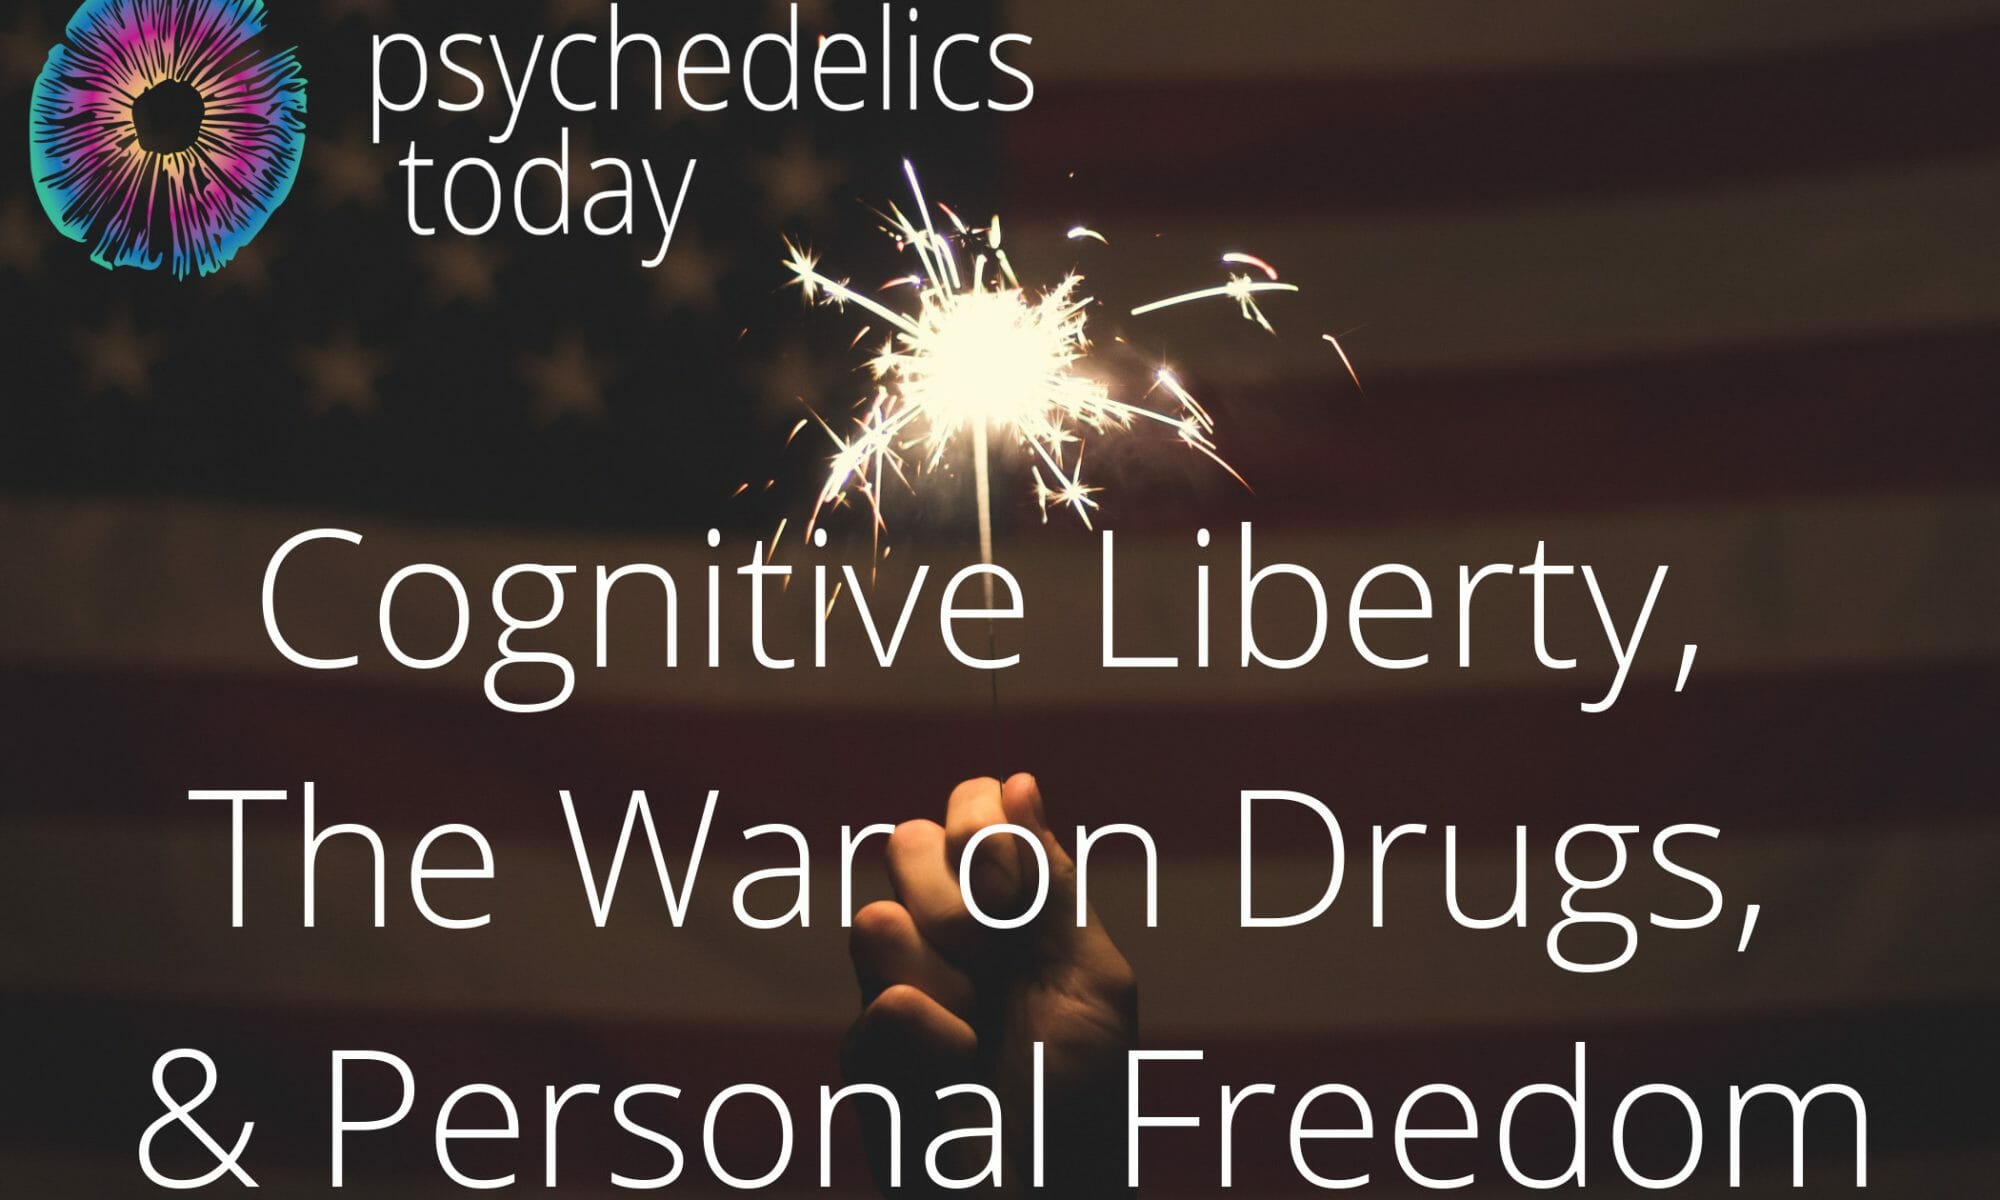 Psychedelics Today - Cognitive Liberty, The War on Drugs, and Personal Freedom